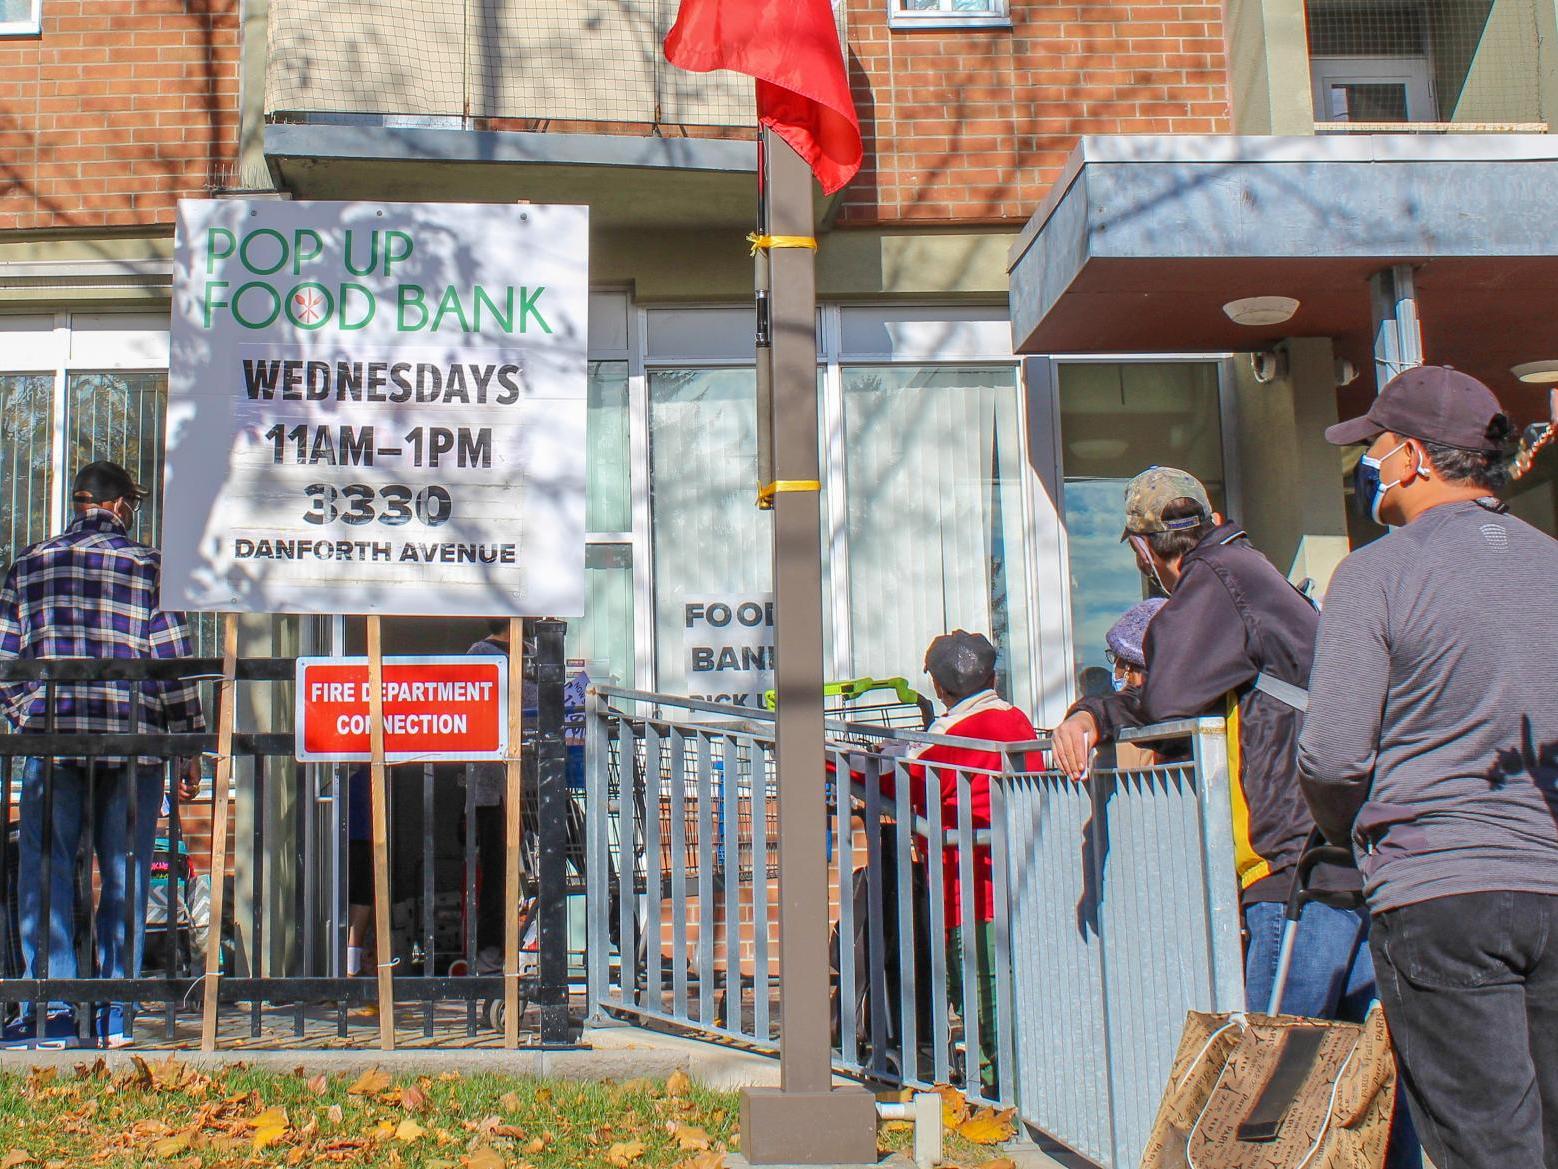 People line up for a food bank on Danforth Avenue at the height of the pandemic in 2020